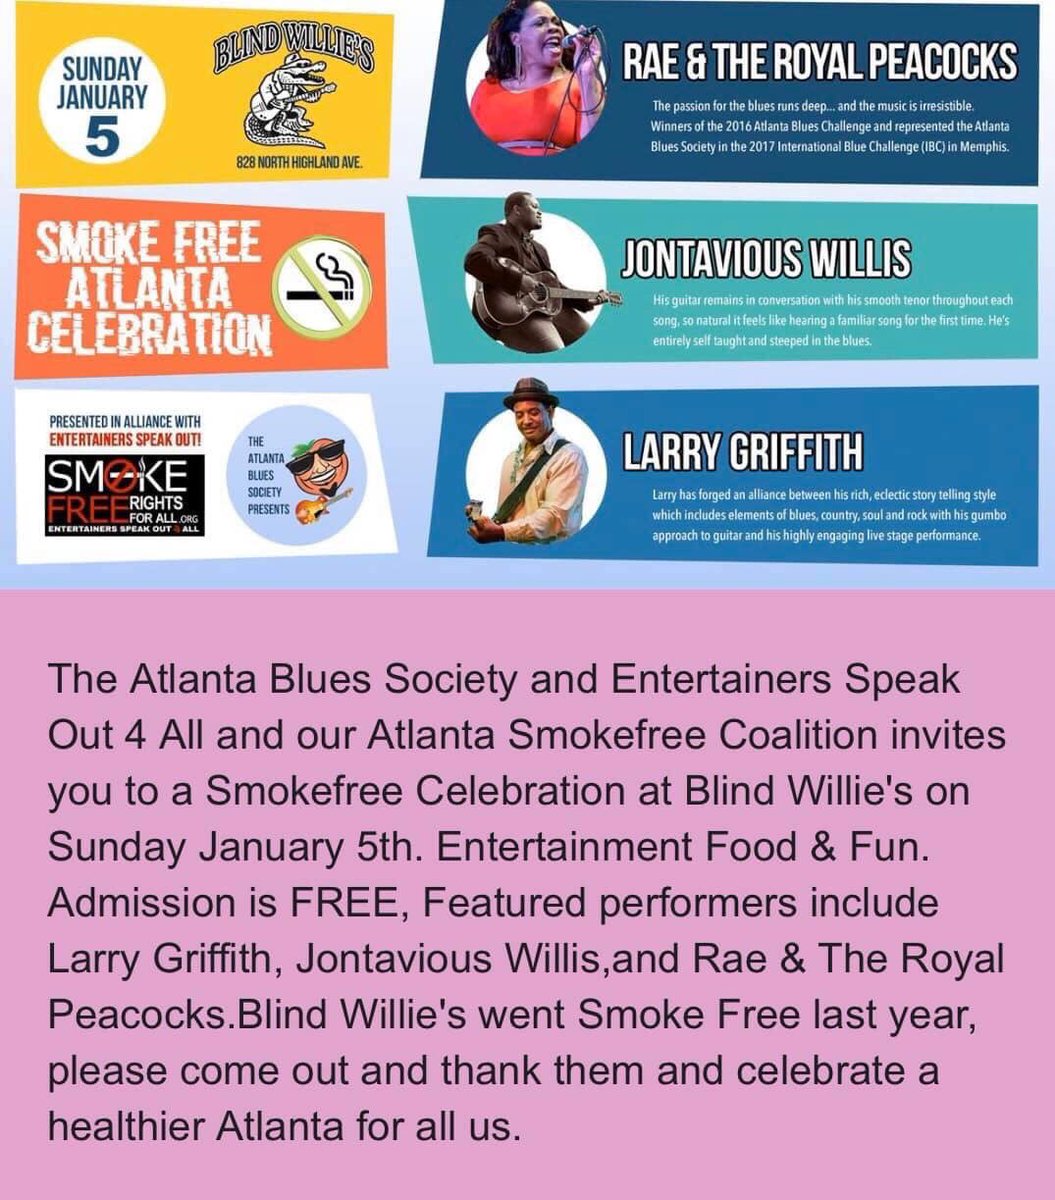 We look forward to seeing everyone today at the @SmokeFreeATL Celebration 6- 930 at Blind Willie’s Blues Club! Free cover, Free entertainment, Free food & Smoke Free!  Music by @lgriffith99 @JontaviousMusic and Rae and The Royal Peacocks!  #atlantabluessociety #smokefreeatlanta